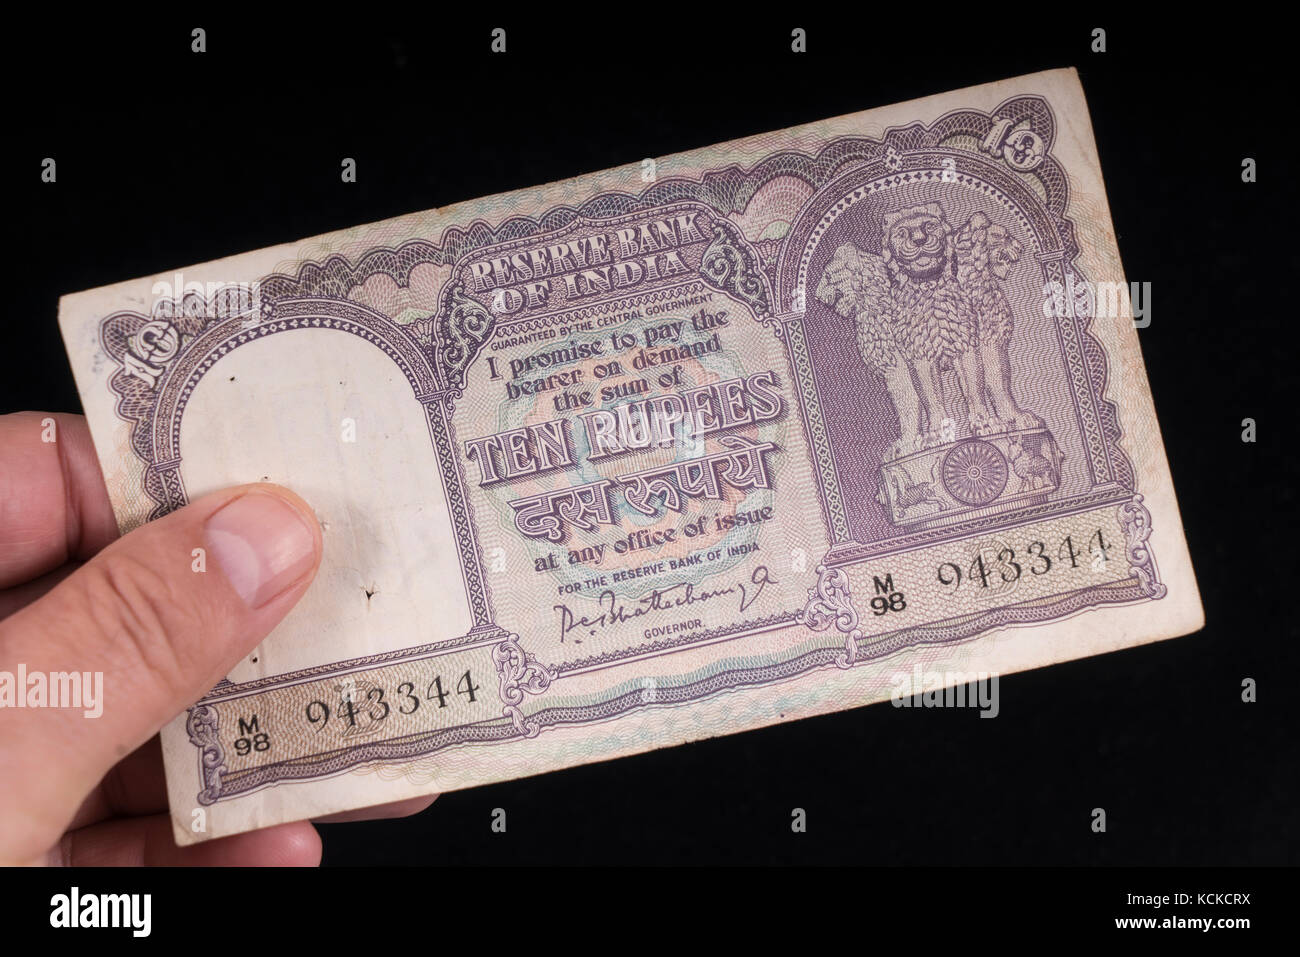 An old Indian banknote on hand Stock Photo